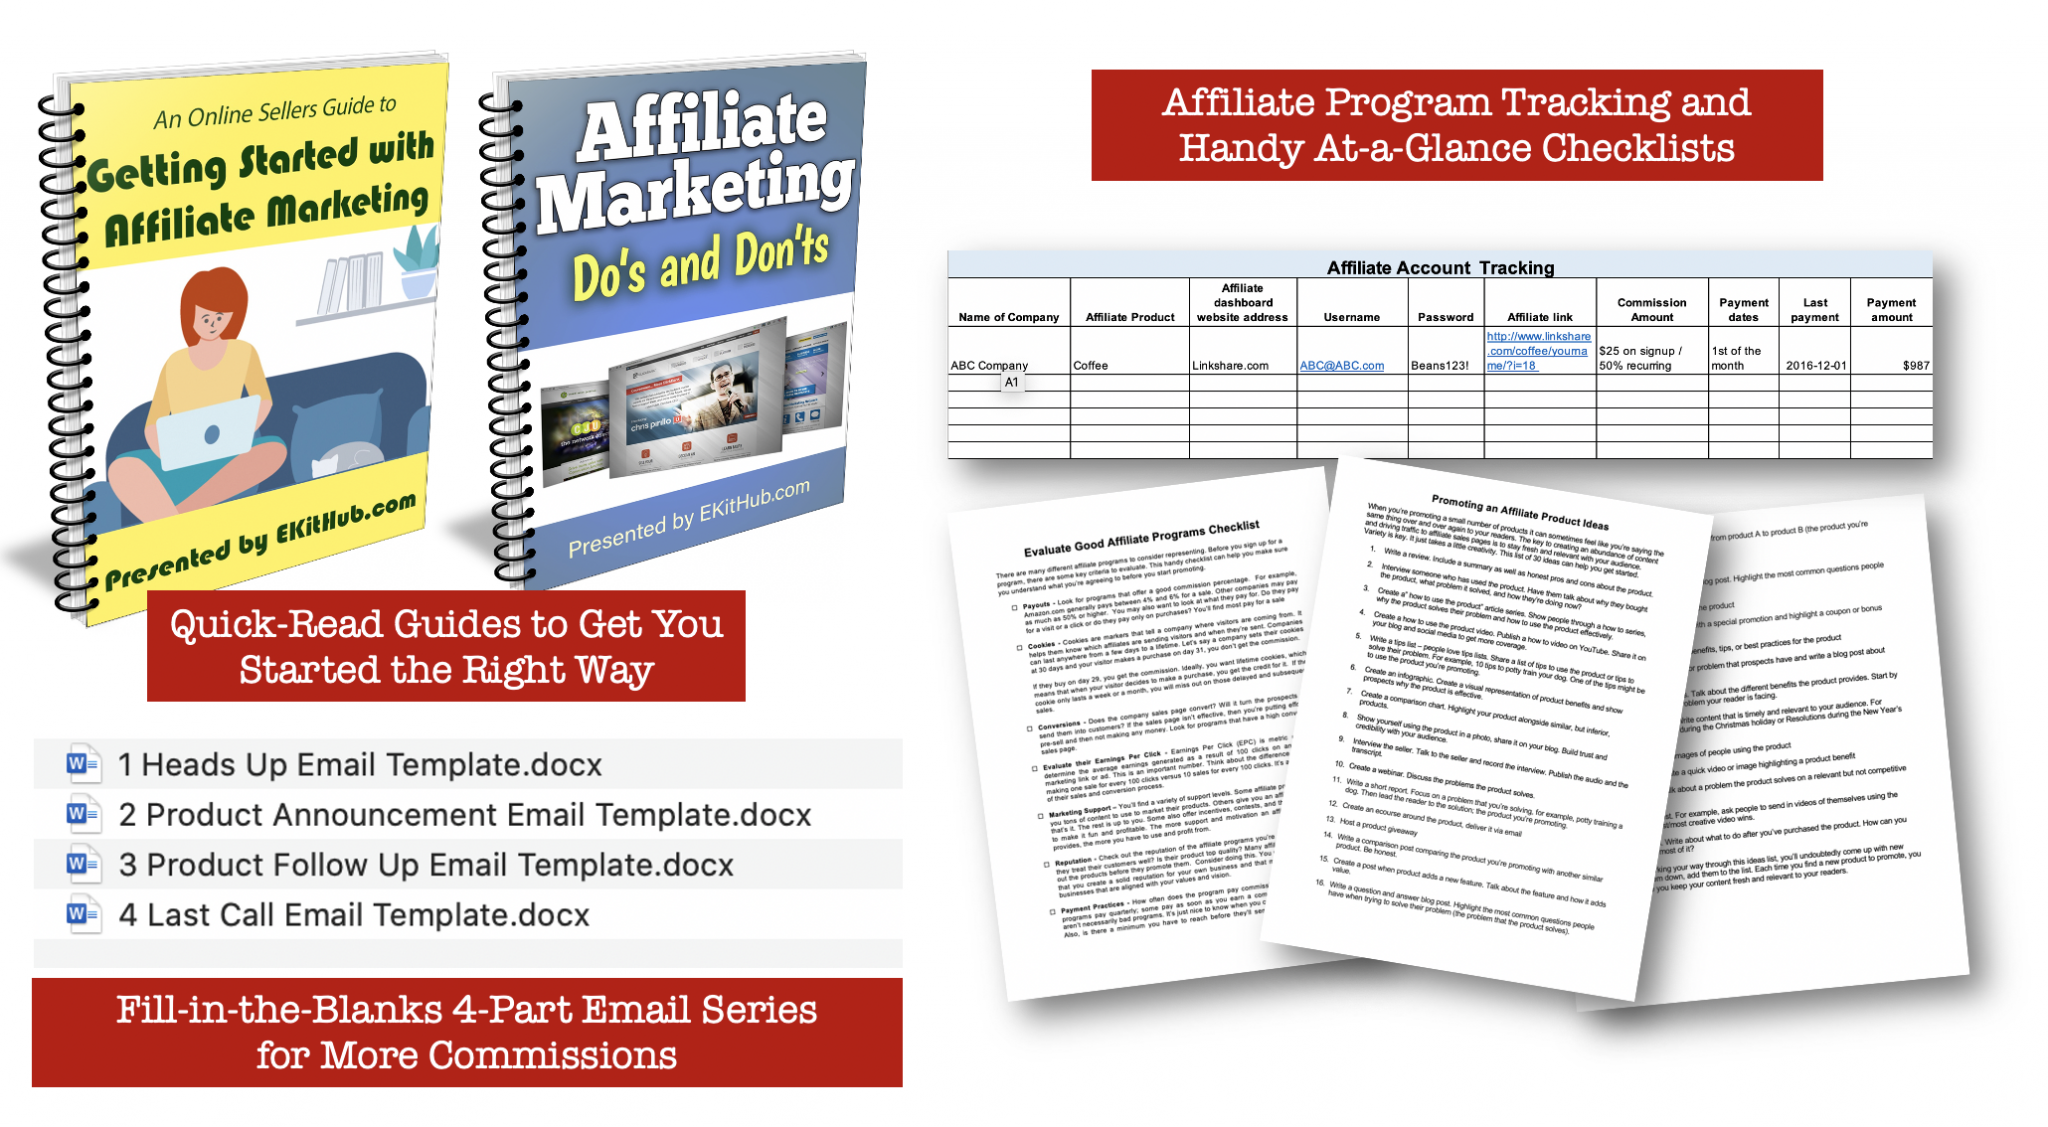 a practical guide to affiliate marketing pdf